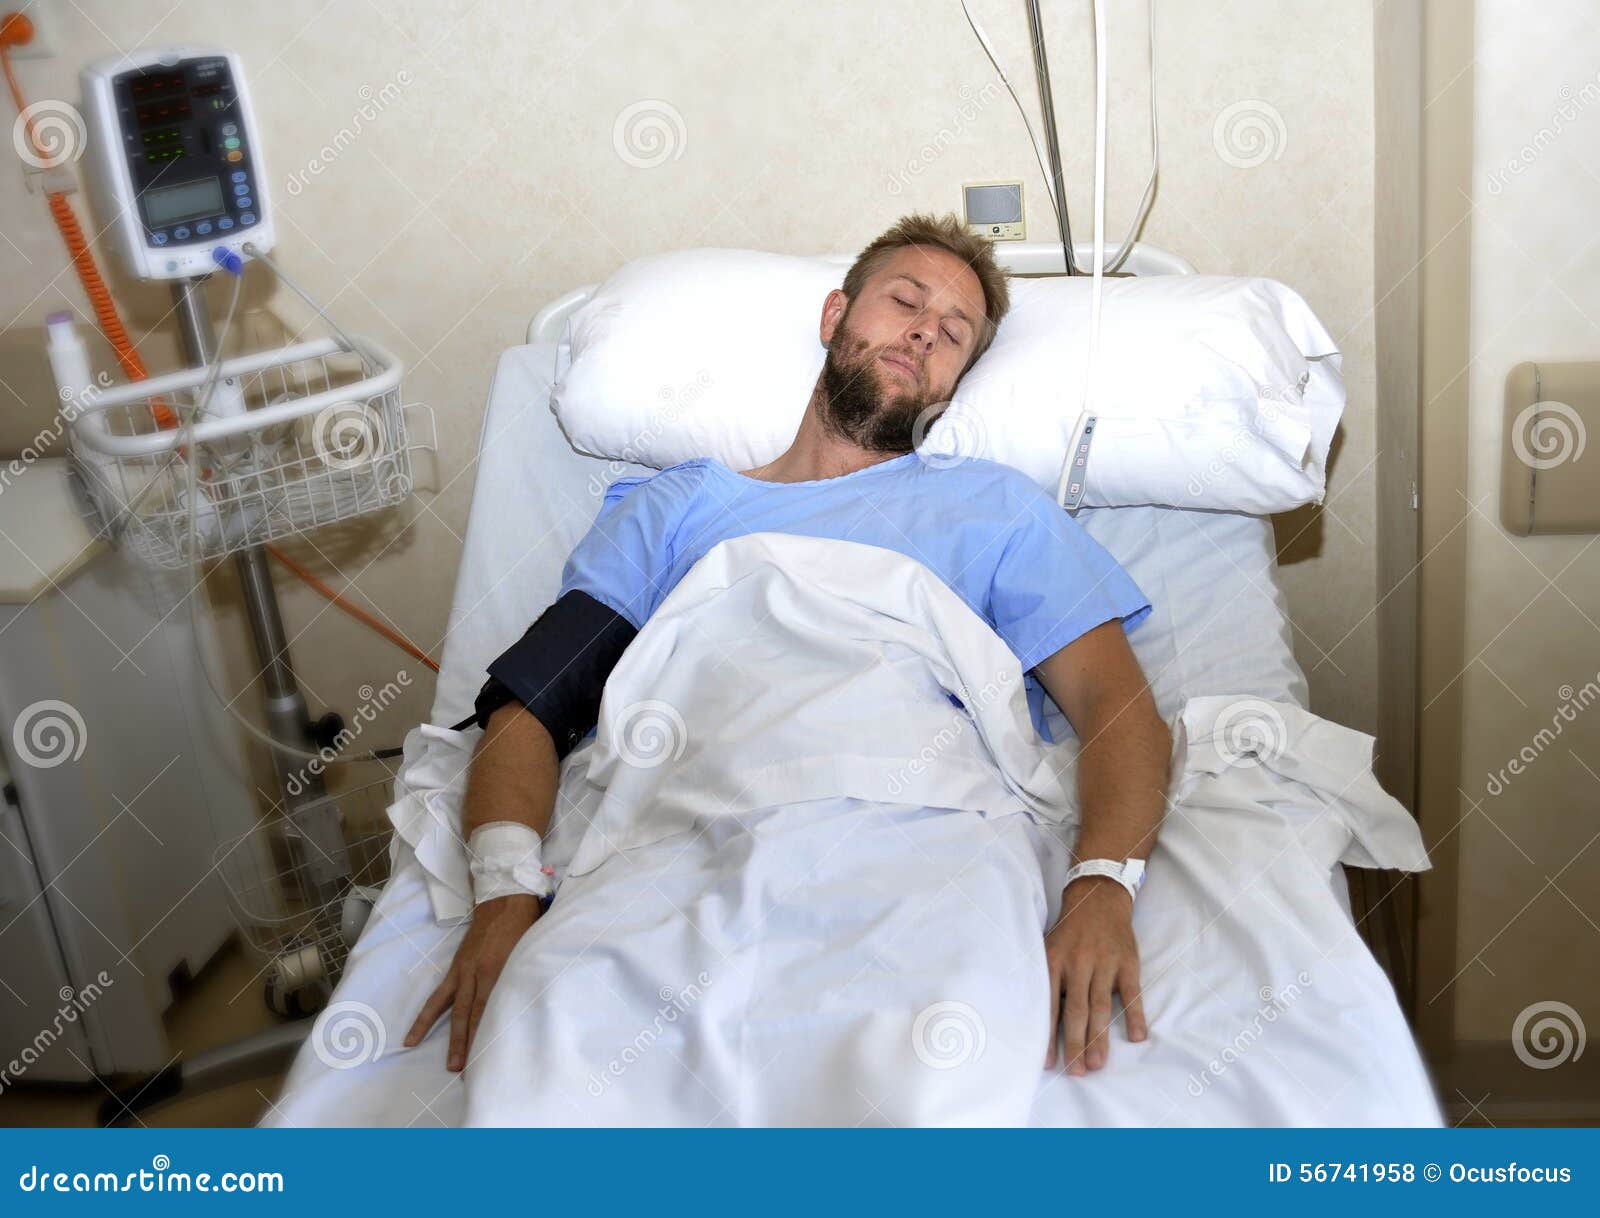 Woman Patient Lying on a Bed in a Hospital Room Stock Photo - Image of ...